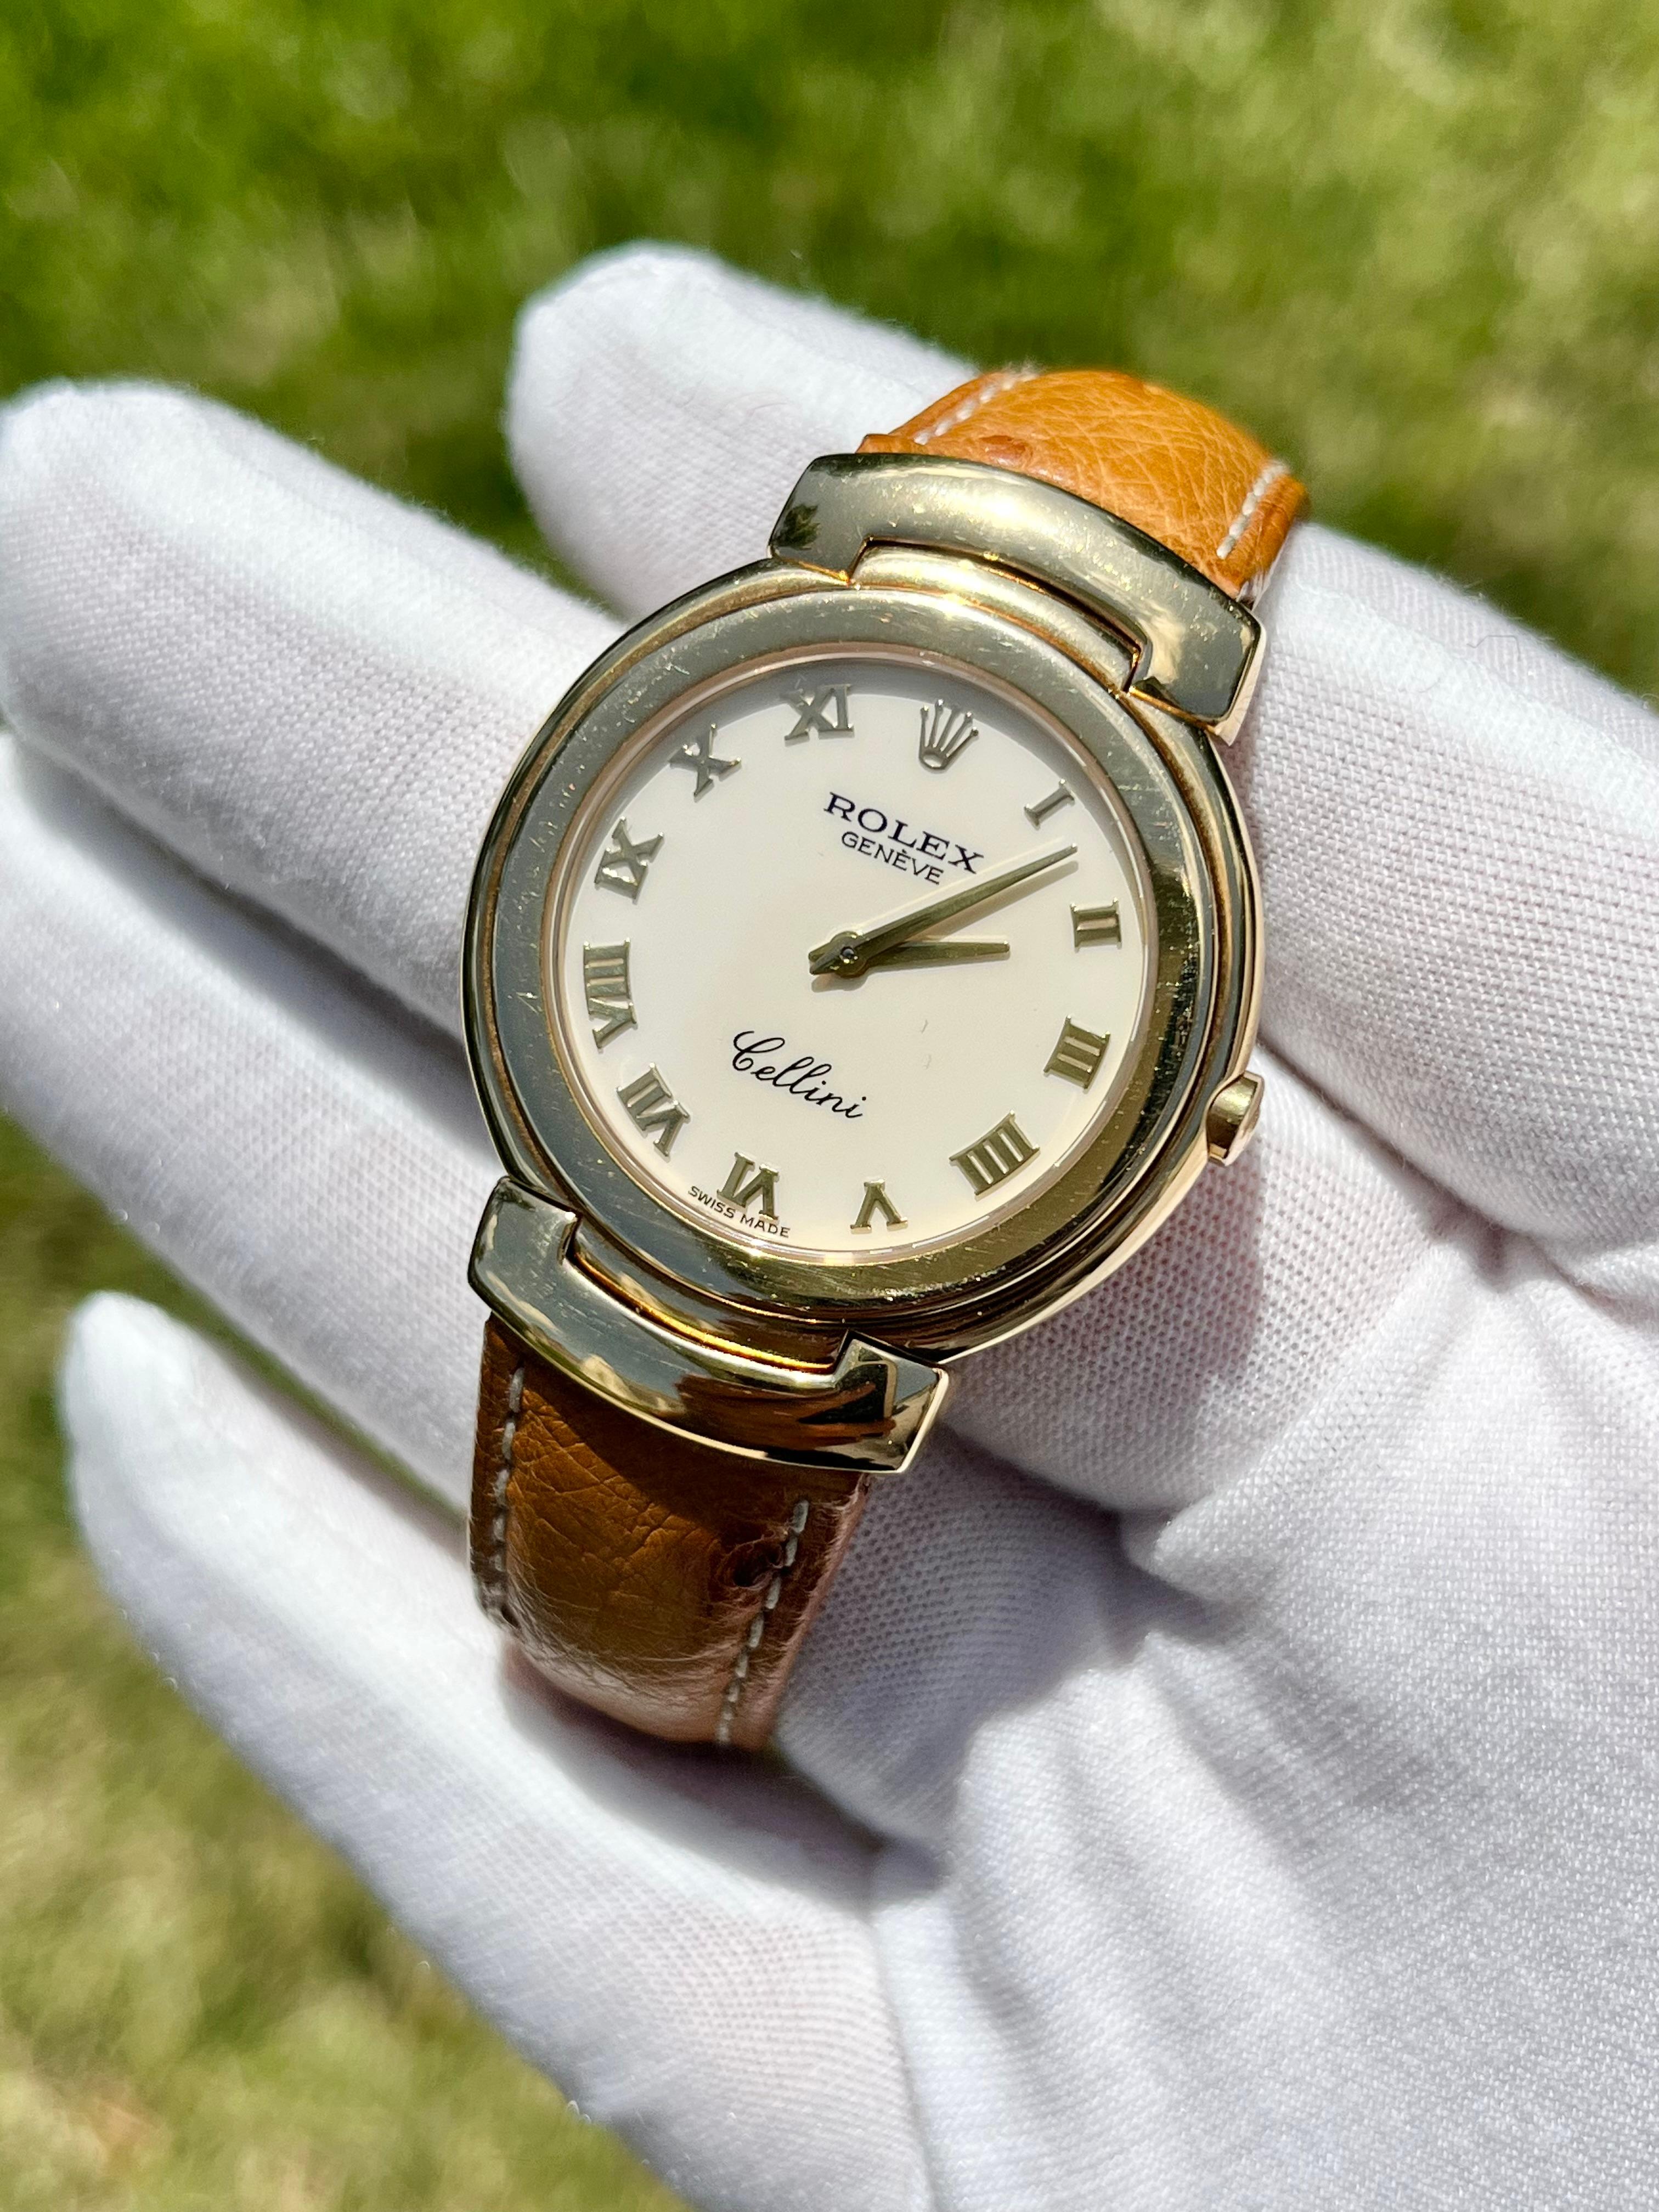 Women's Rolex Ref. 6622 Cellini in 18k Gold Ladies Watch with Brown Leather Strap